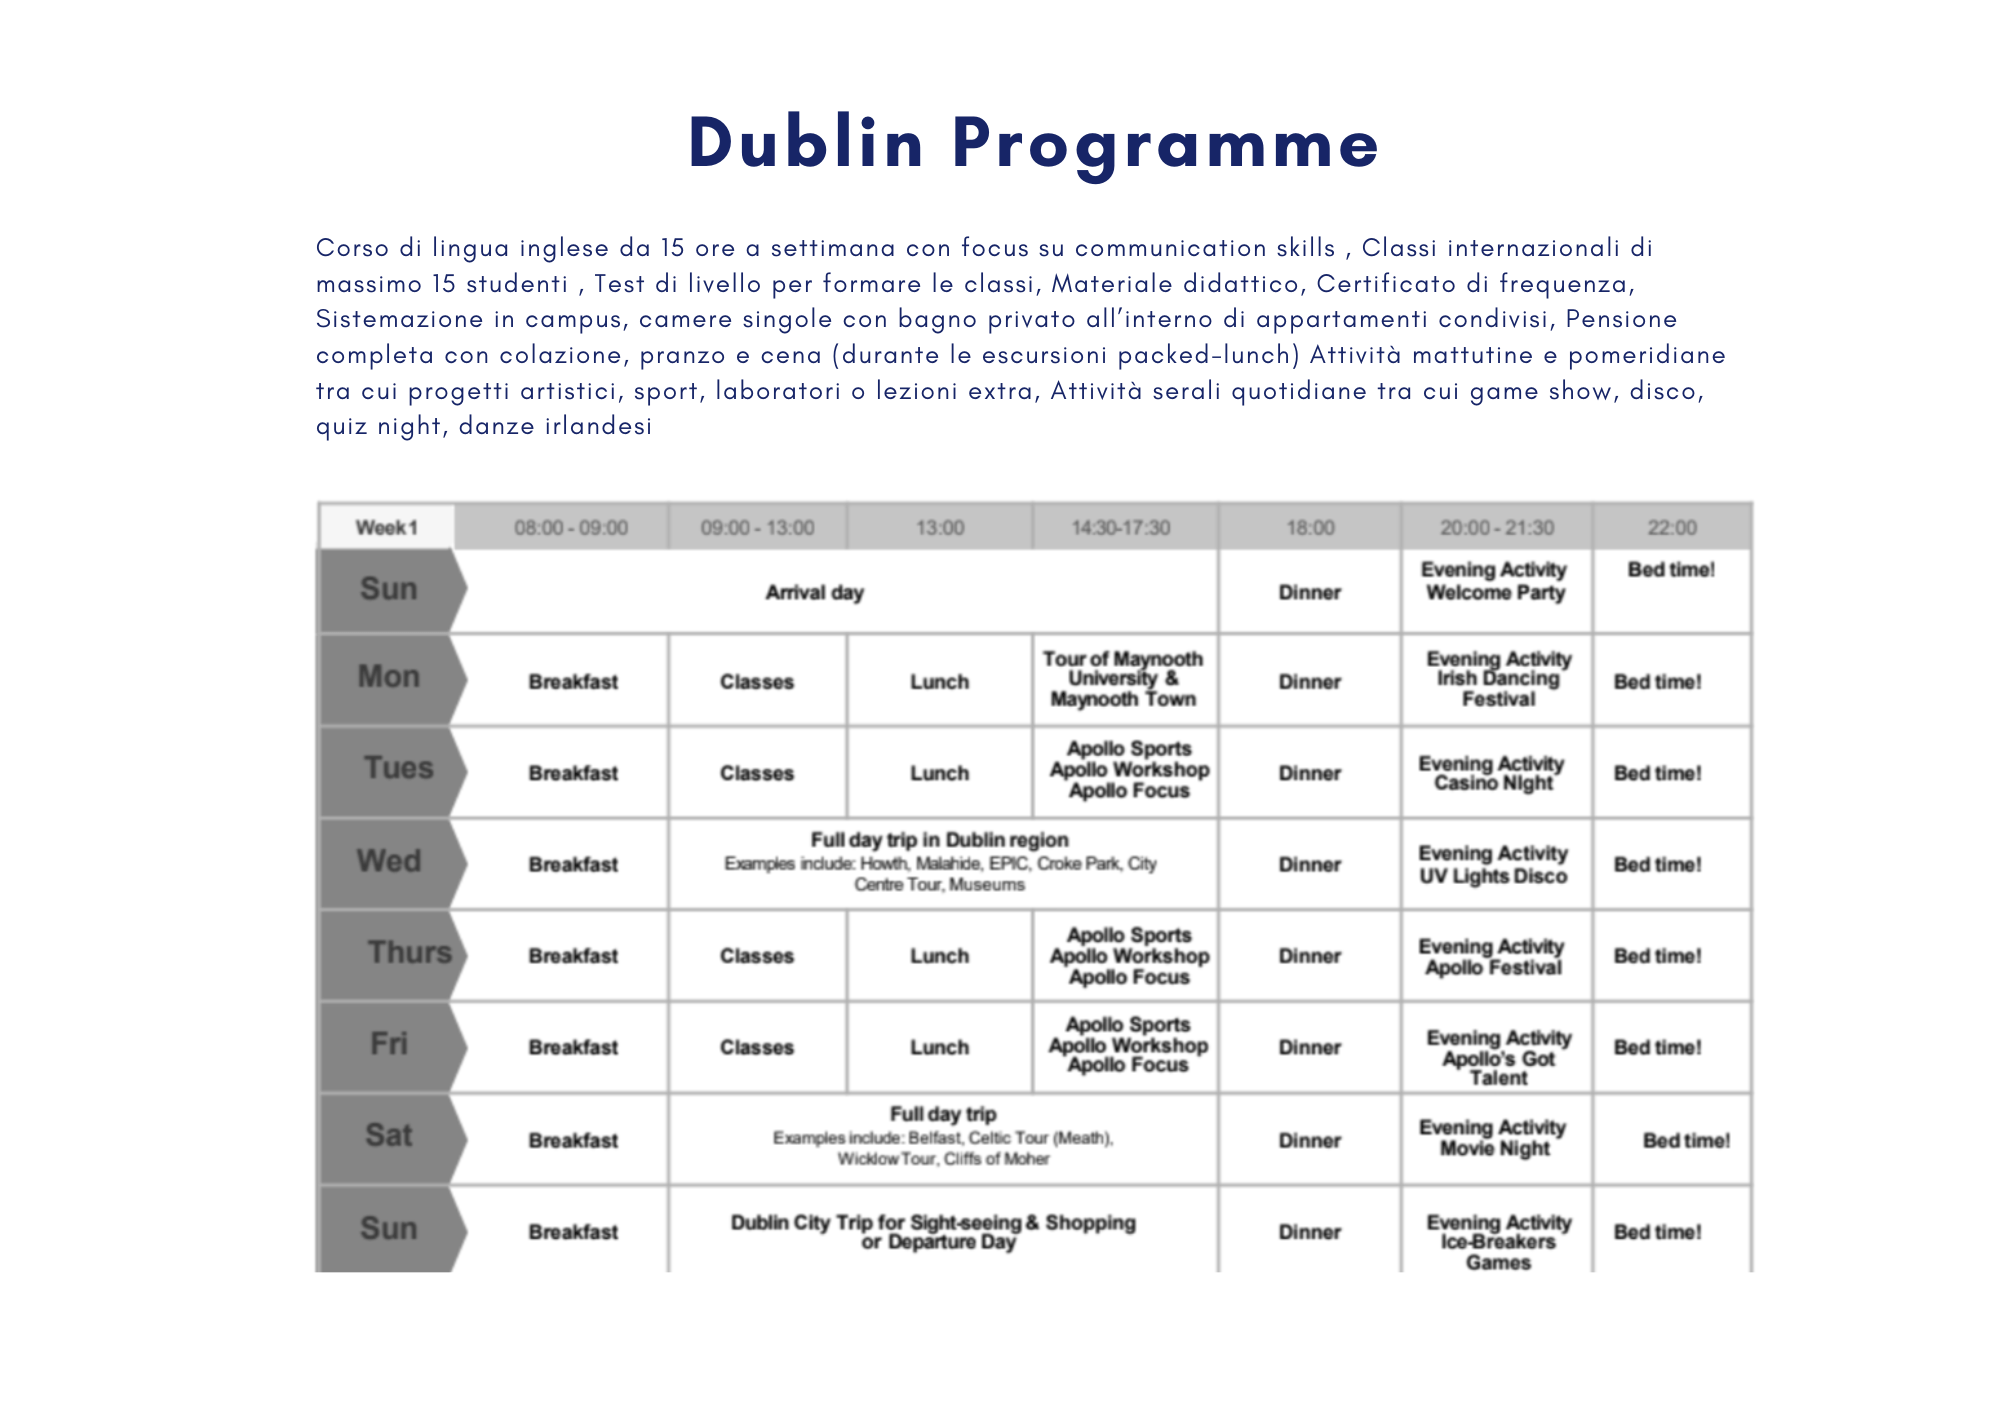 Maynooth Programme